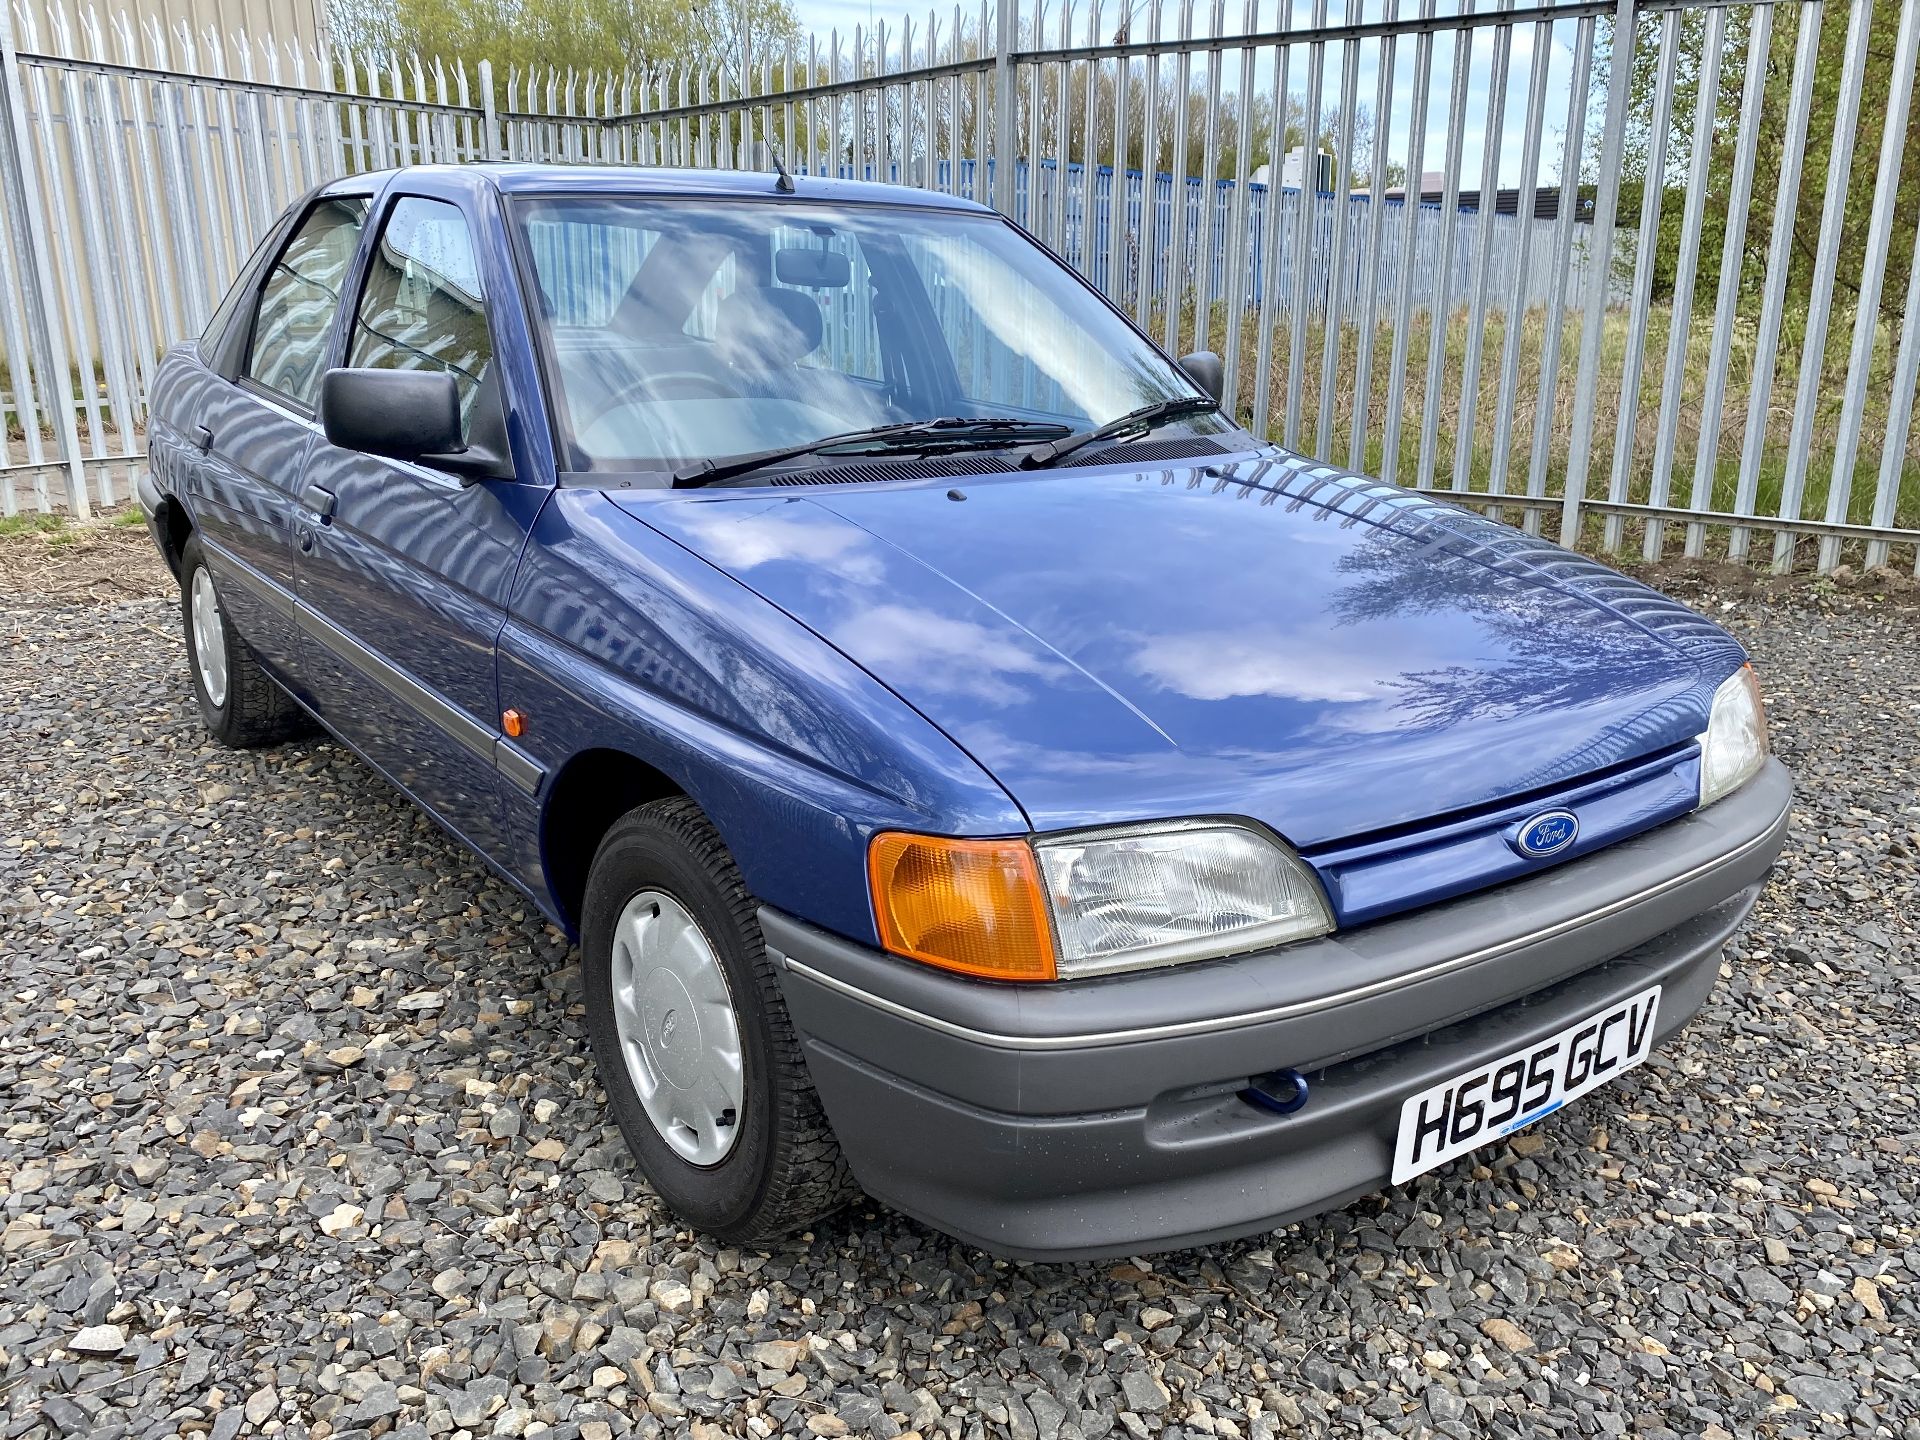 Ford Escort LX1.4 - Image 22 of 54